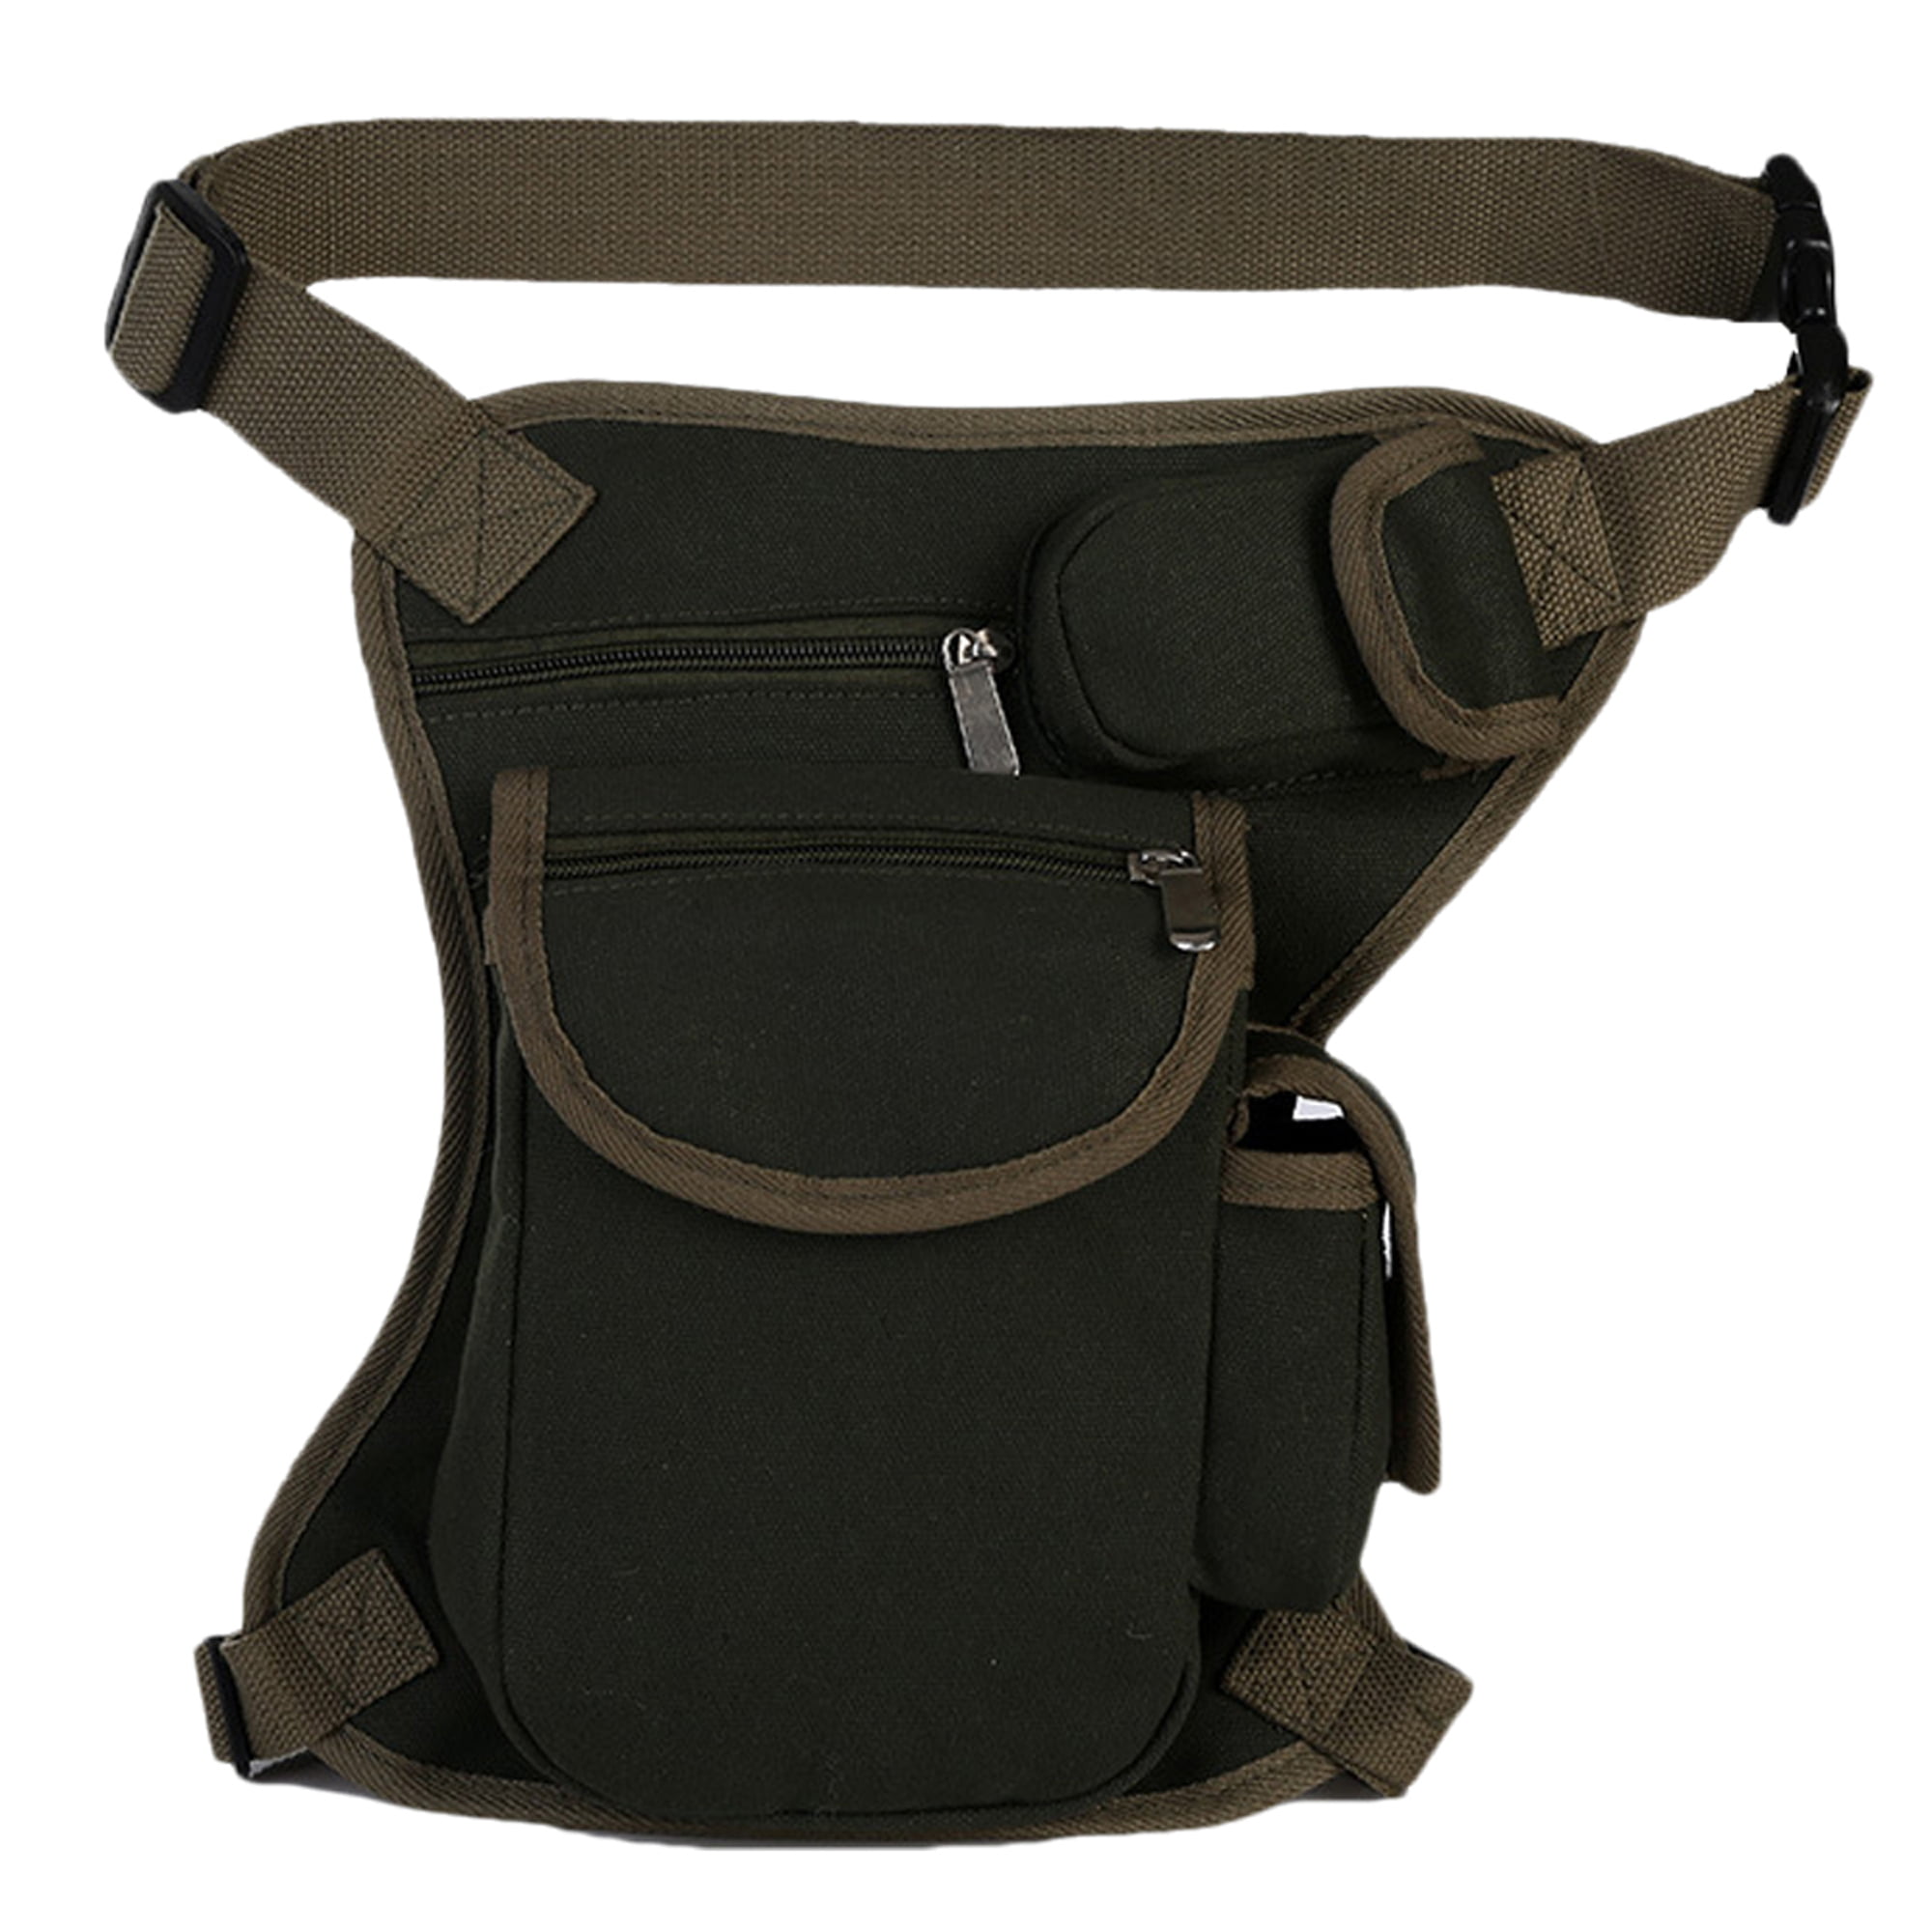 Tactical Drop Leg Bag Tool Fanny Thigh Pack Pouch Utility Bags Outdoor Hiking 